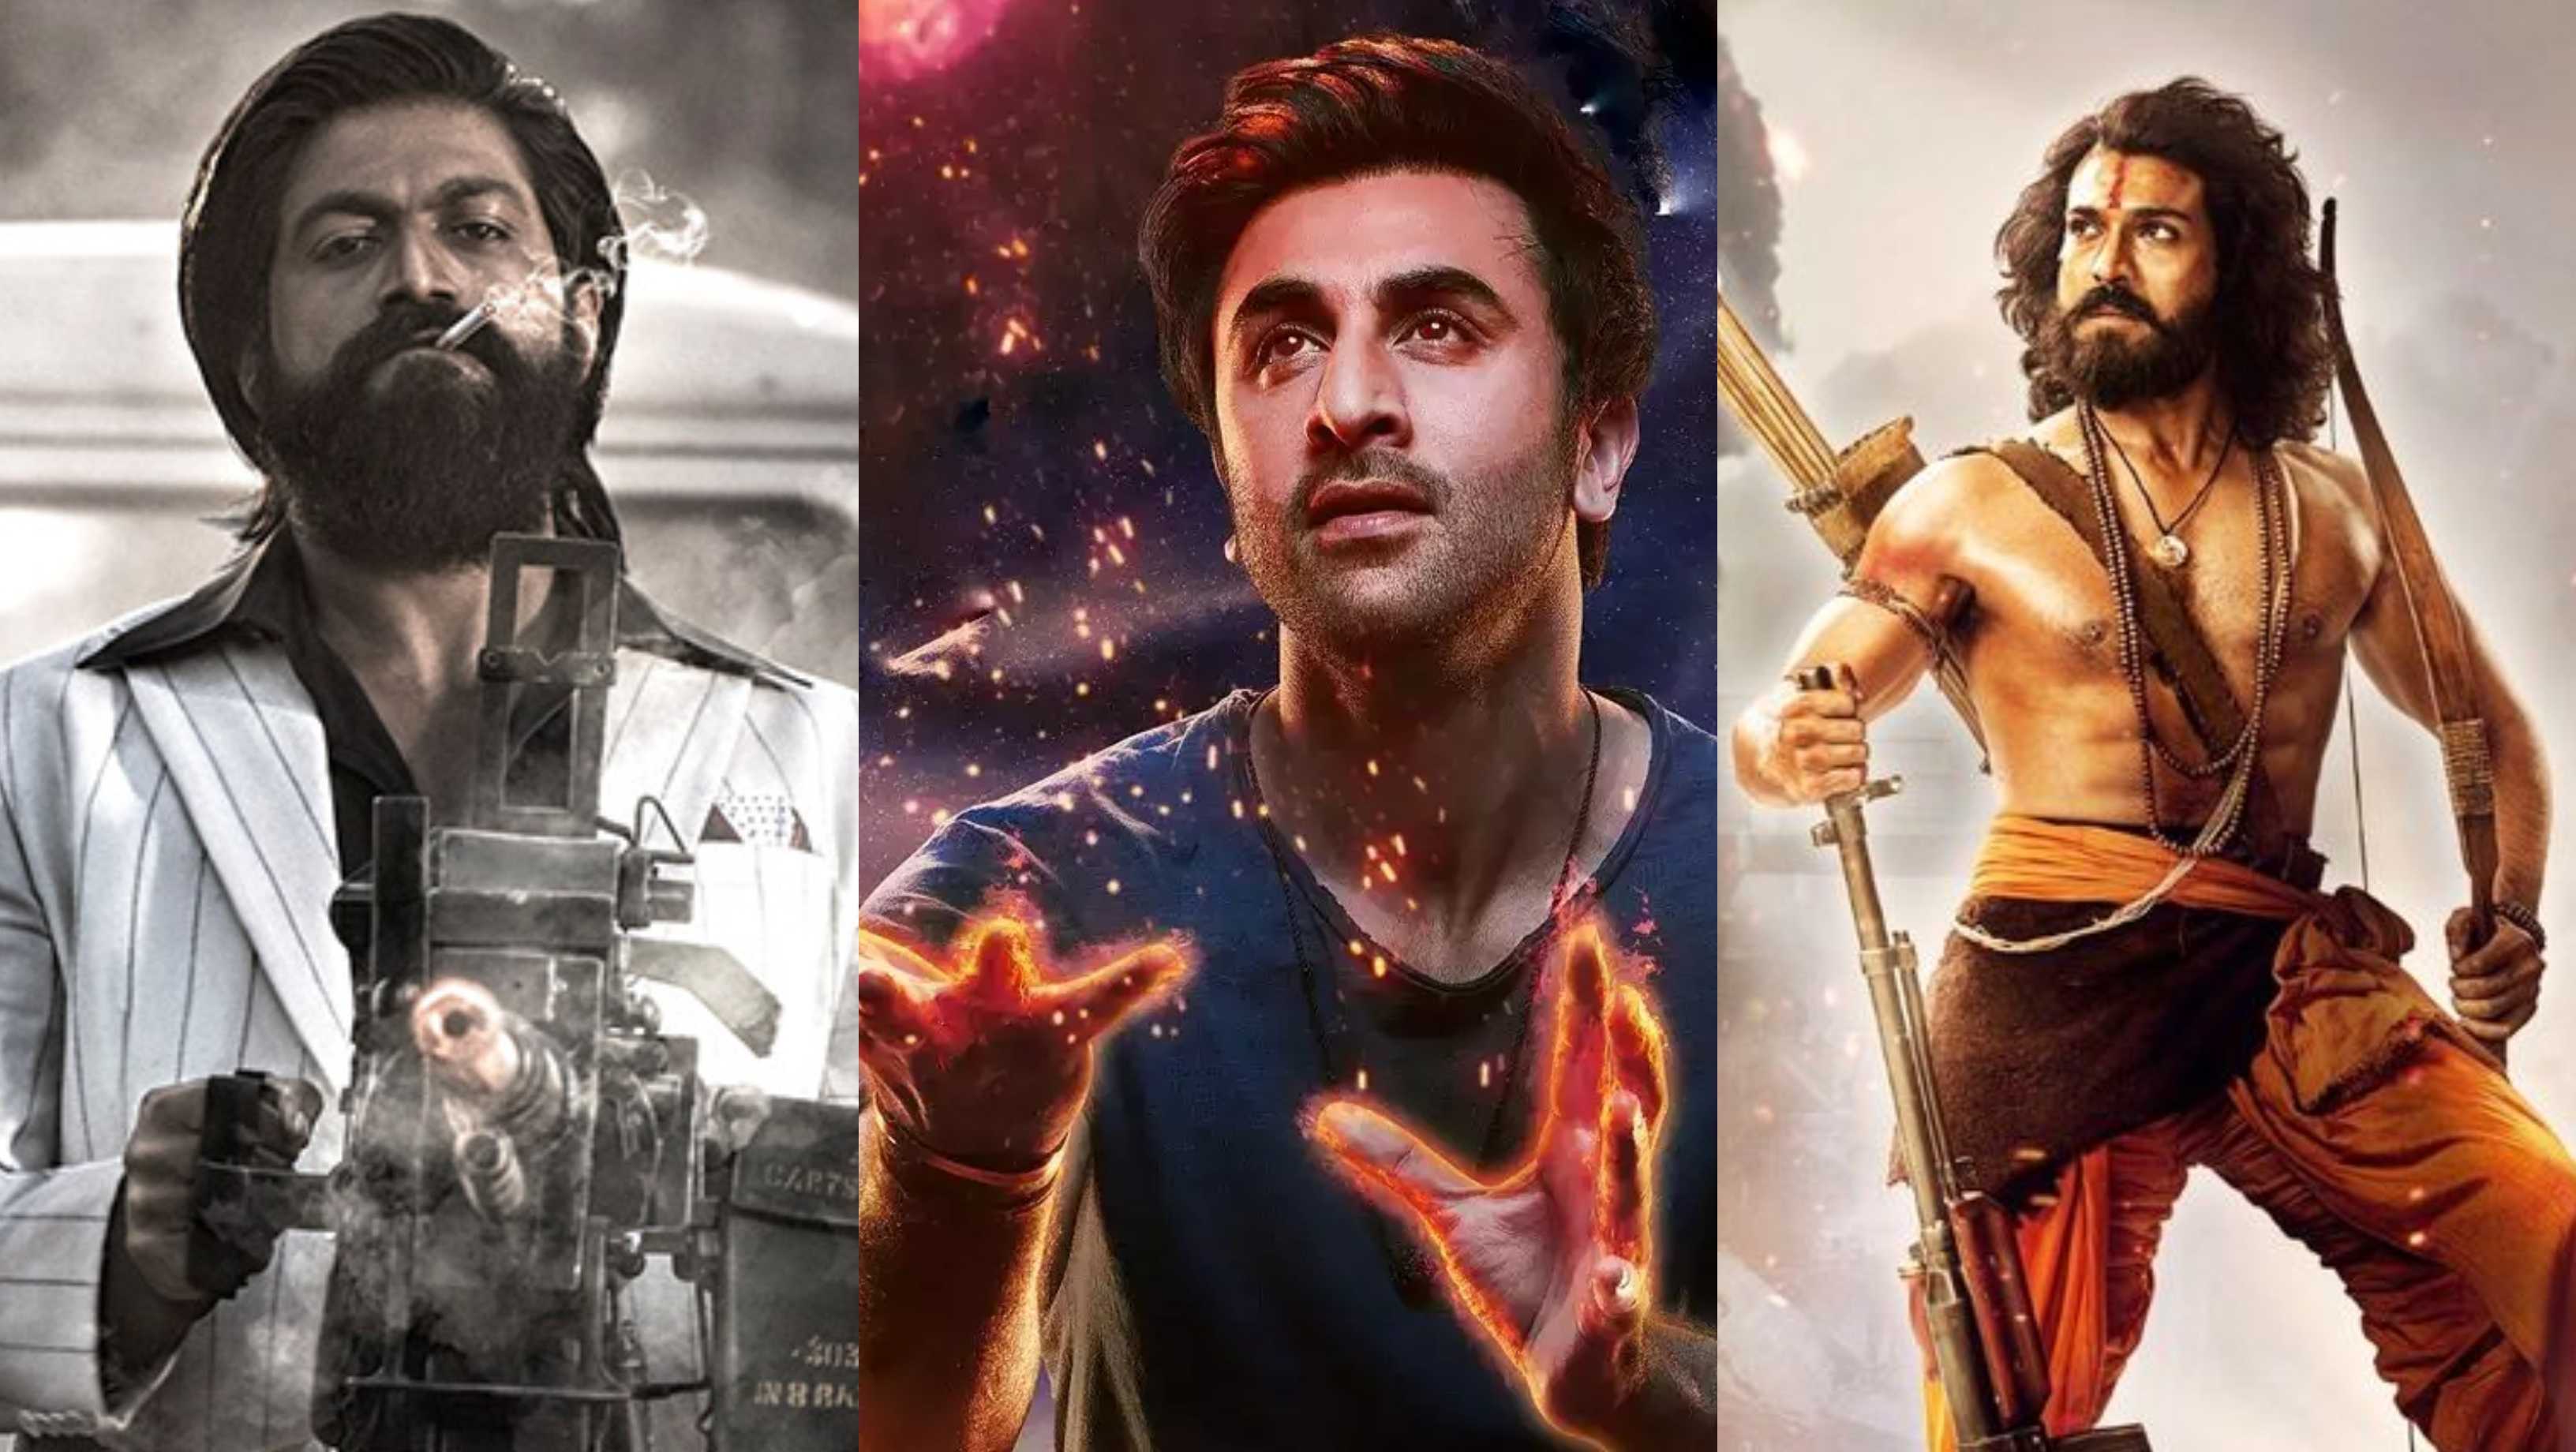 These pan-Indian films left Brahmastra and Drishyam 2 behind this year